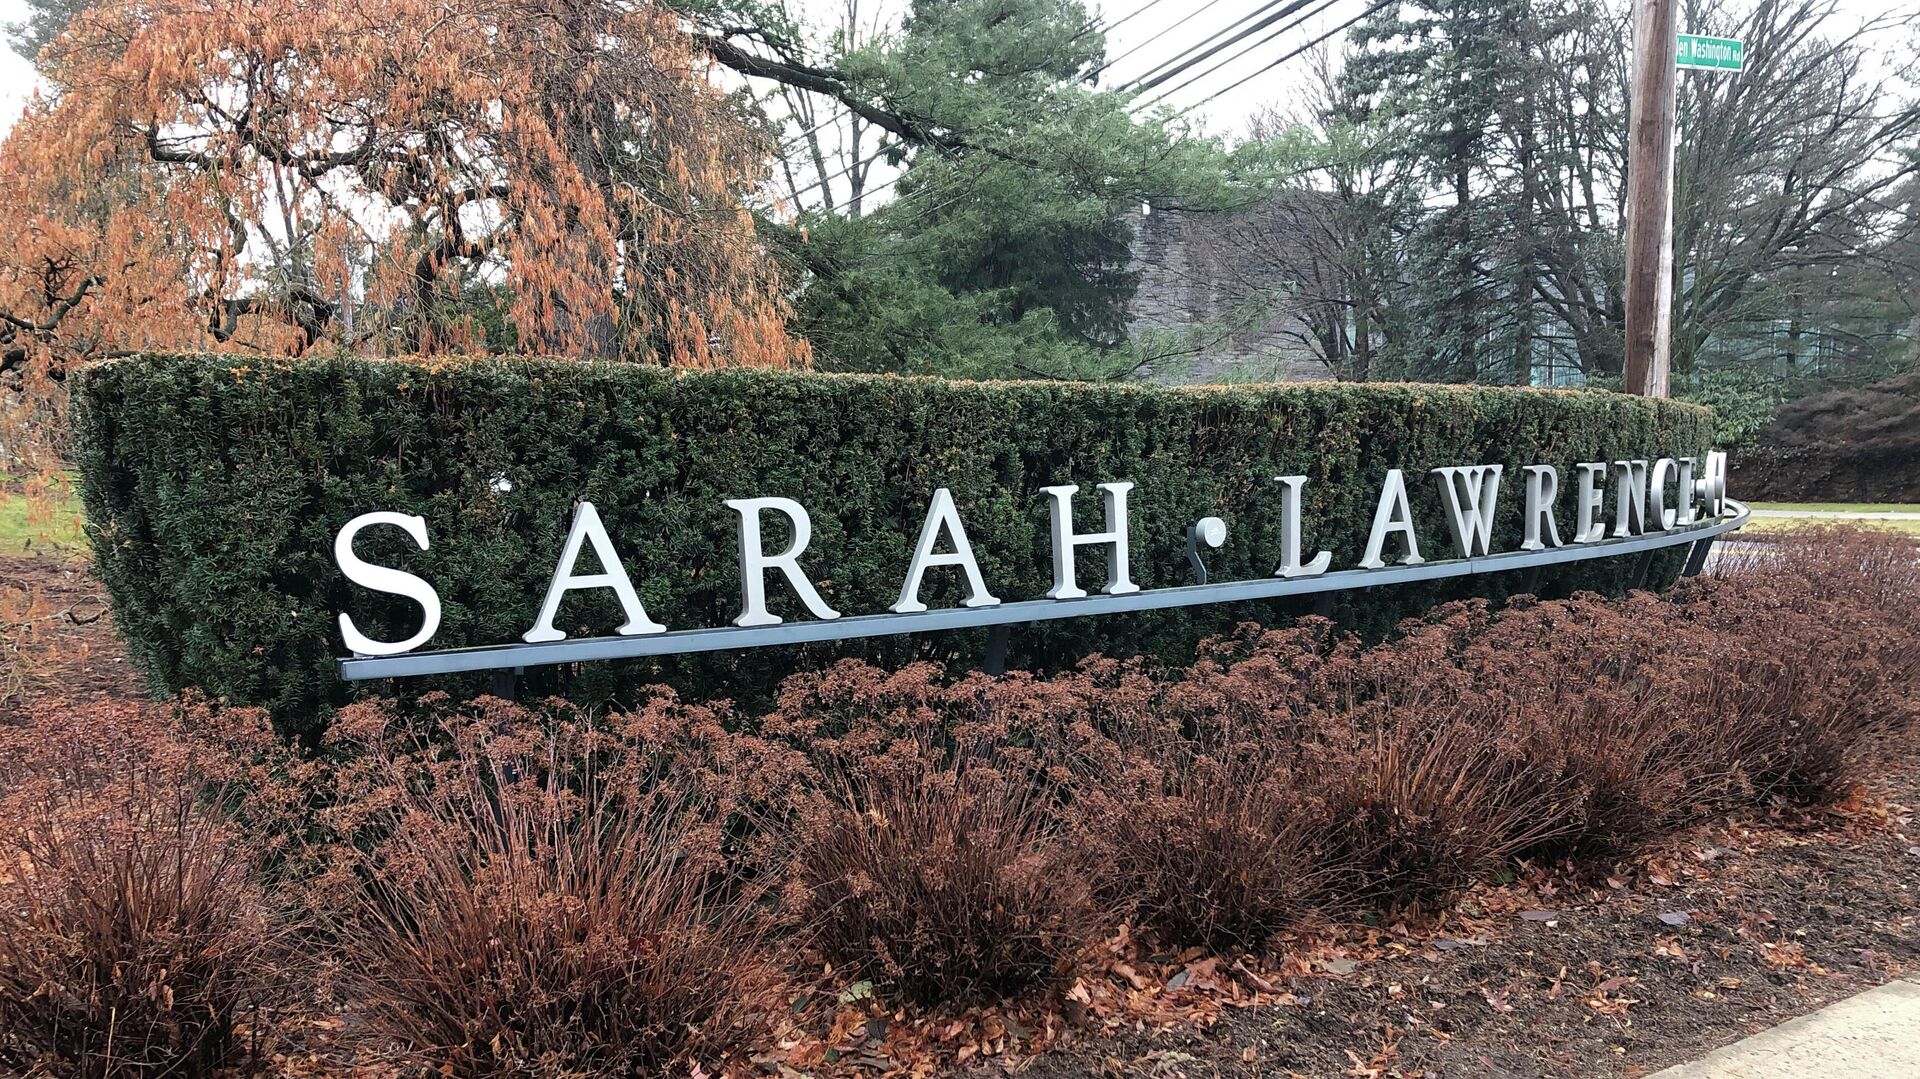 In this Feb. 11, 2020 file photo, a sign along a hedge row marks the campus of Sarah Lawrence College in Yonkers, N.Y. Lawrence Ray, charged with forcing some college students into prostitution after moving in on campus at Sarah Lawrence College with his daughter, has raised questions about the screening and security of student housing. - Sputnik International, 1920, 06.04.2022